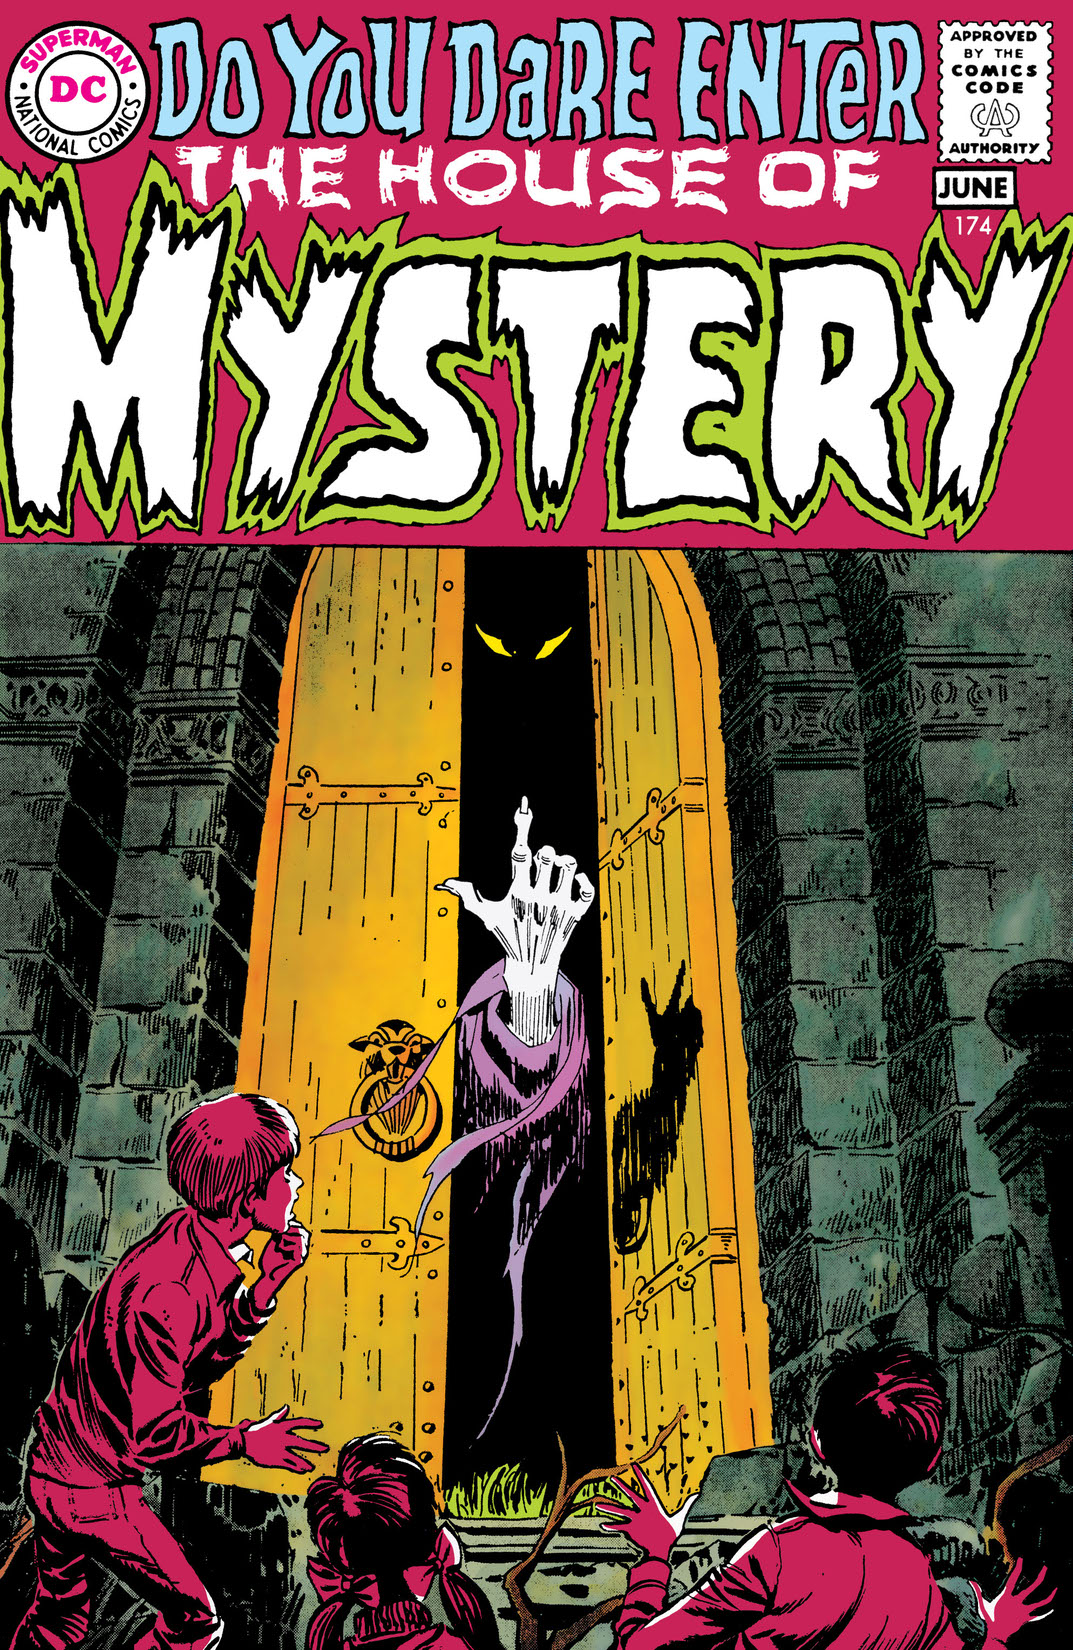 House of Mystery (1951-) #174 preview images